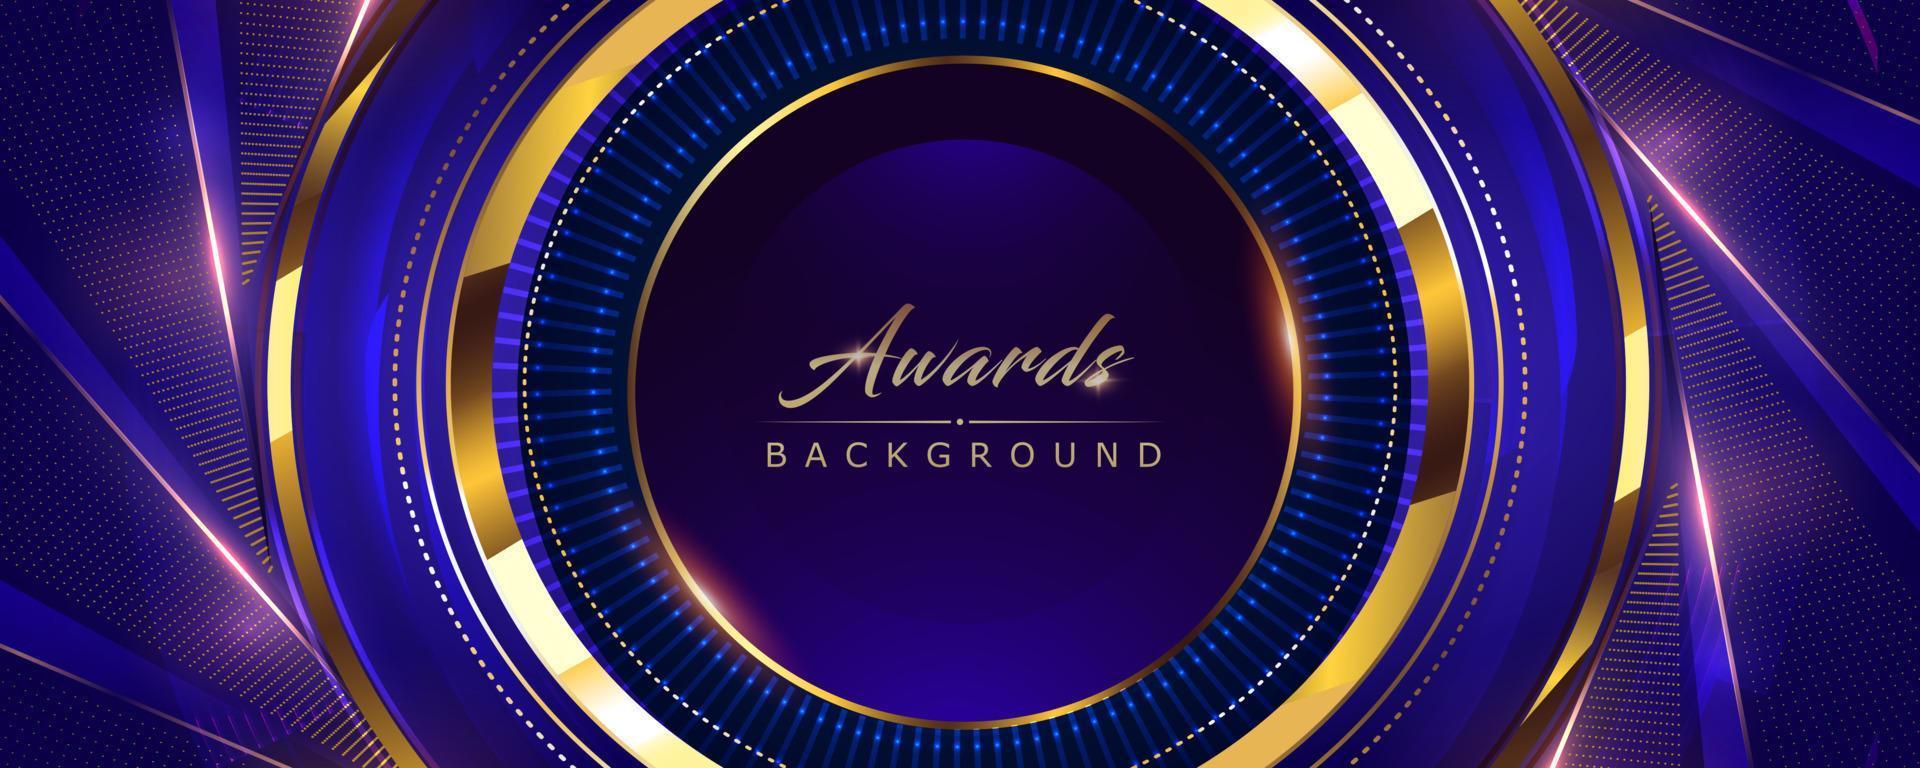 Blue and Golden Color Round Ring Circle Award Background. Luxury Background Graphics. Modern Abstract Template. Expensive Looking Amazing Look. Golden Gradient Tunnel Hud Motion Look Design. vector